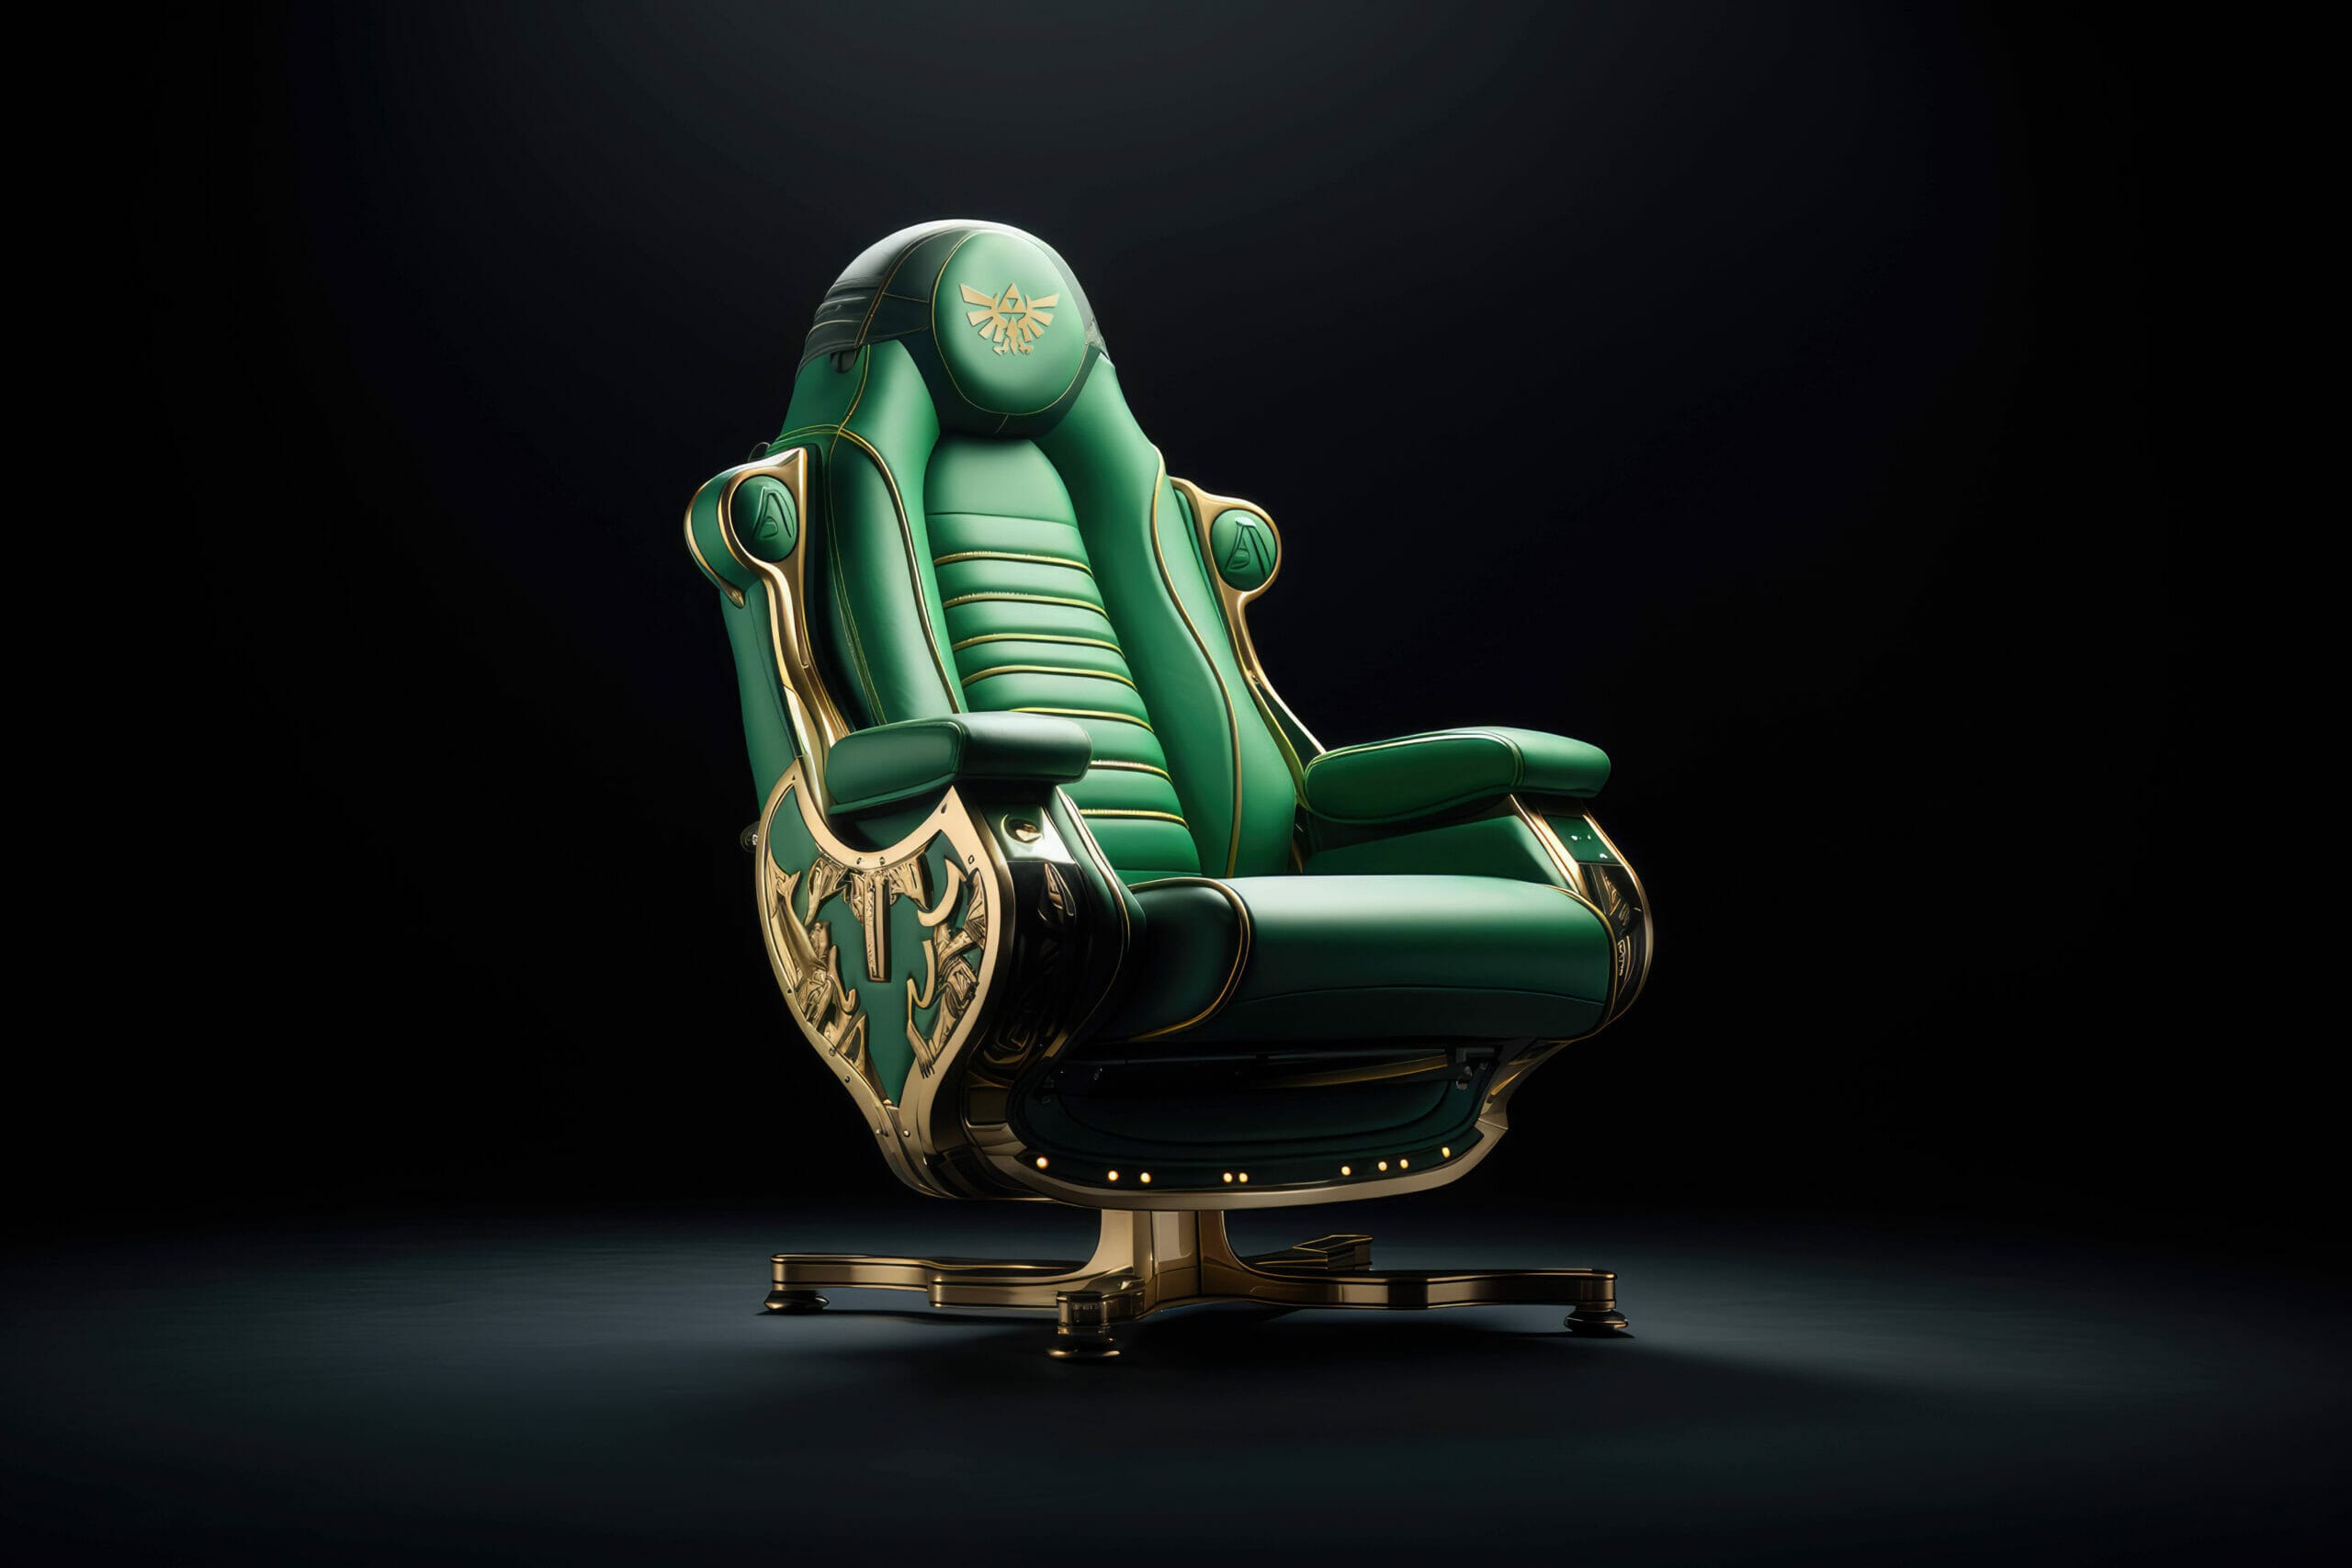 The Legend of Zelda inspired gaming chair